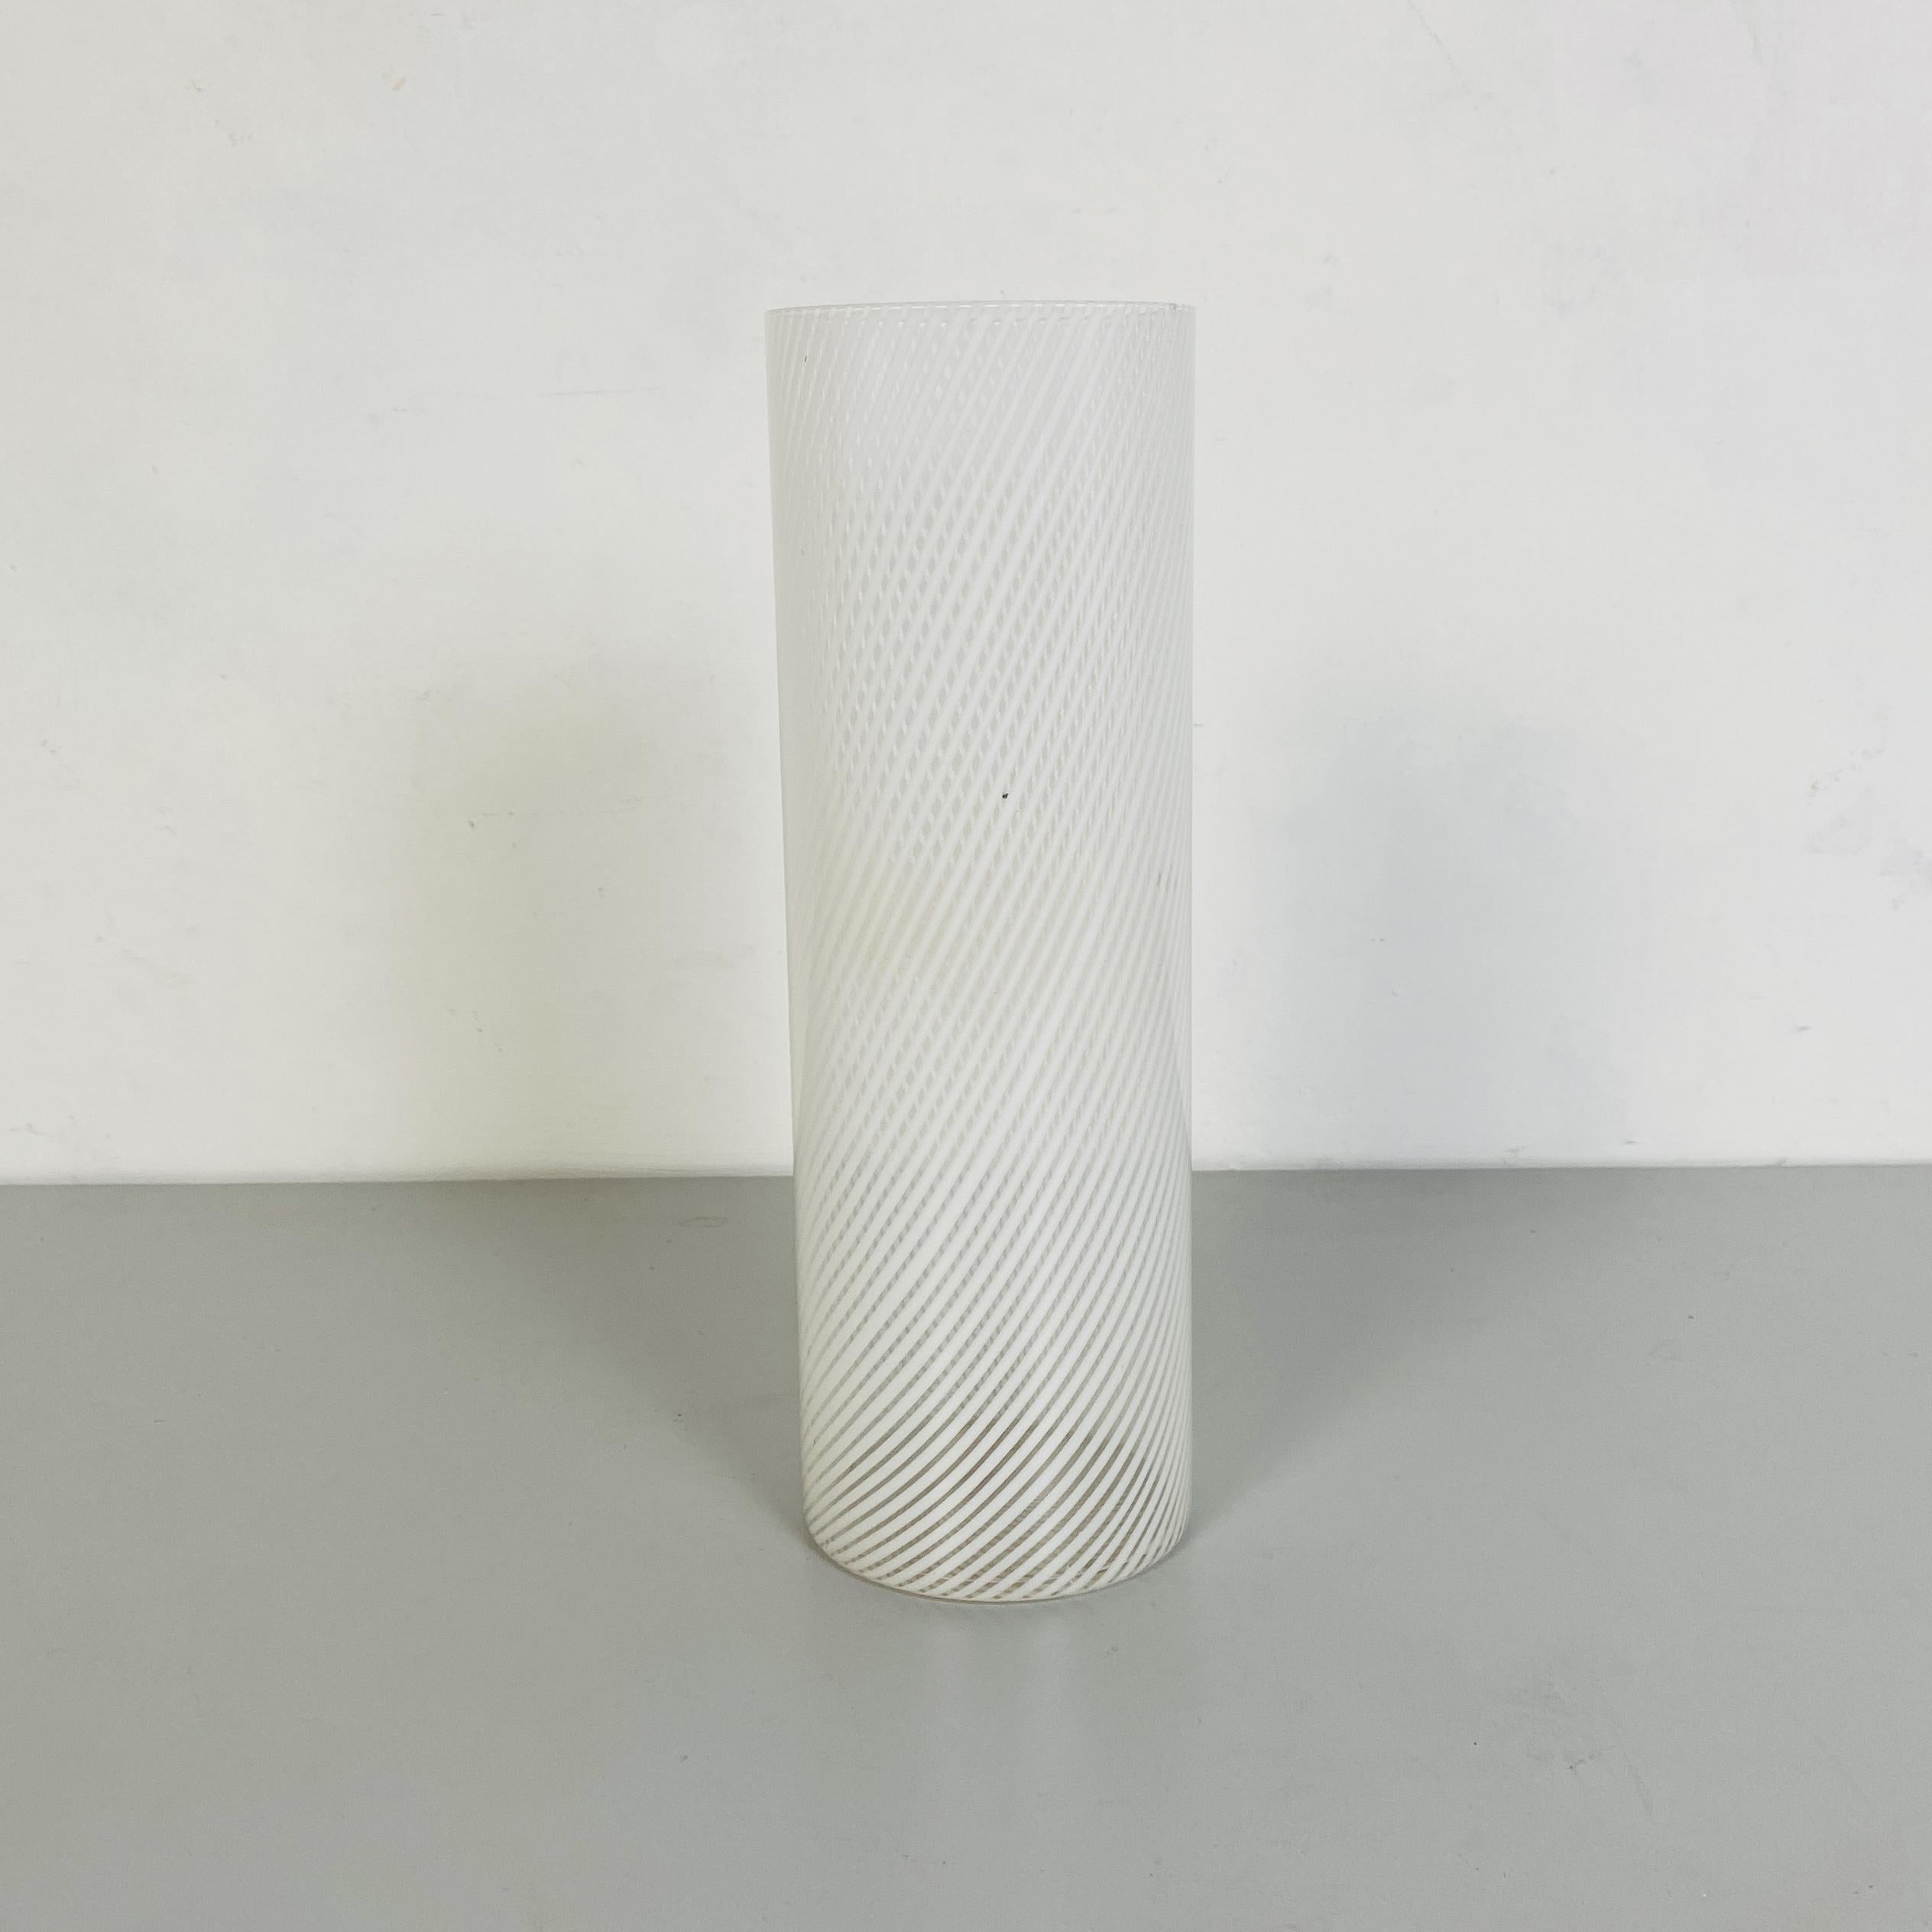 White Murano glass vase, 1970s with cylindrical white spiral pattern.
Murano artistic vase for flower or just to decorate a library or a center of a table.
The pattern look like Reticella effect but it is not, this is after, near the 1970s period,